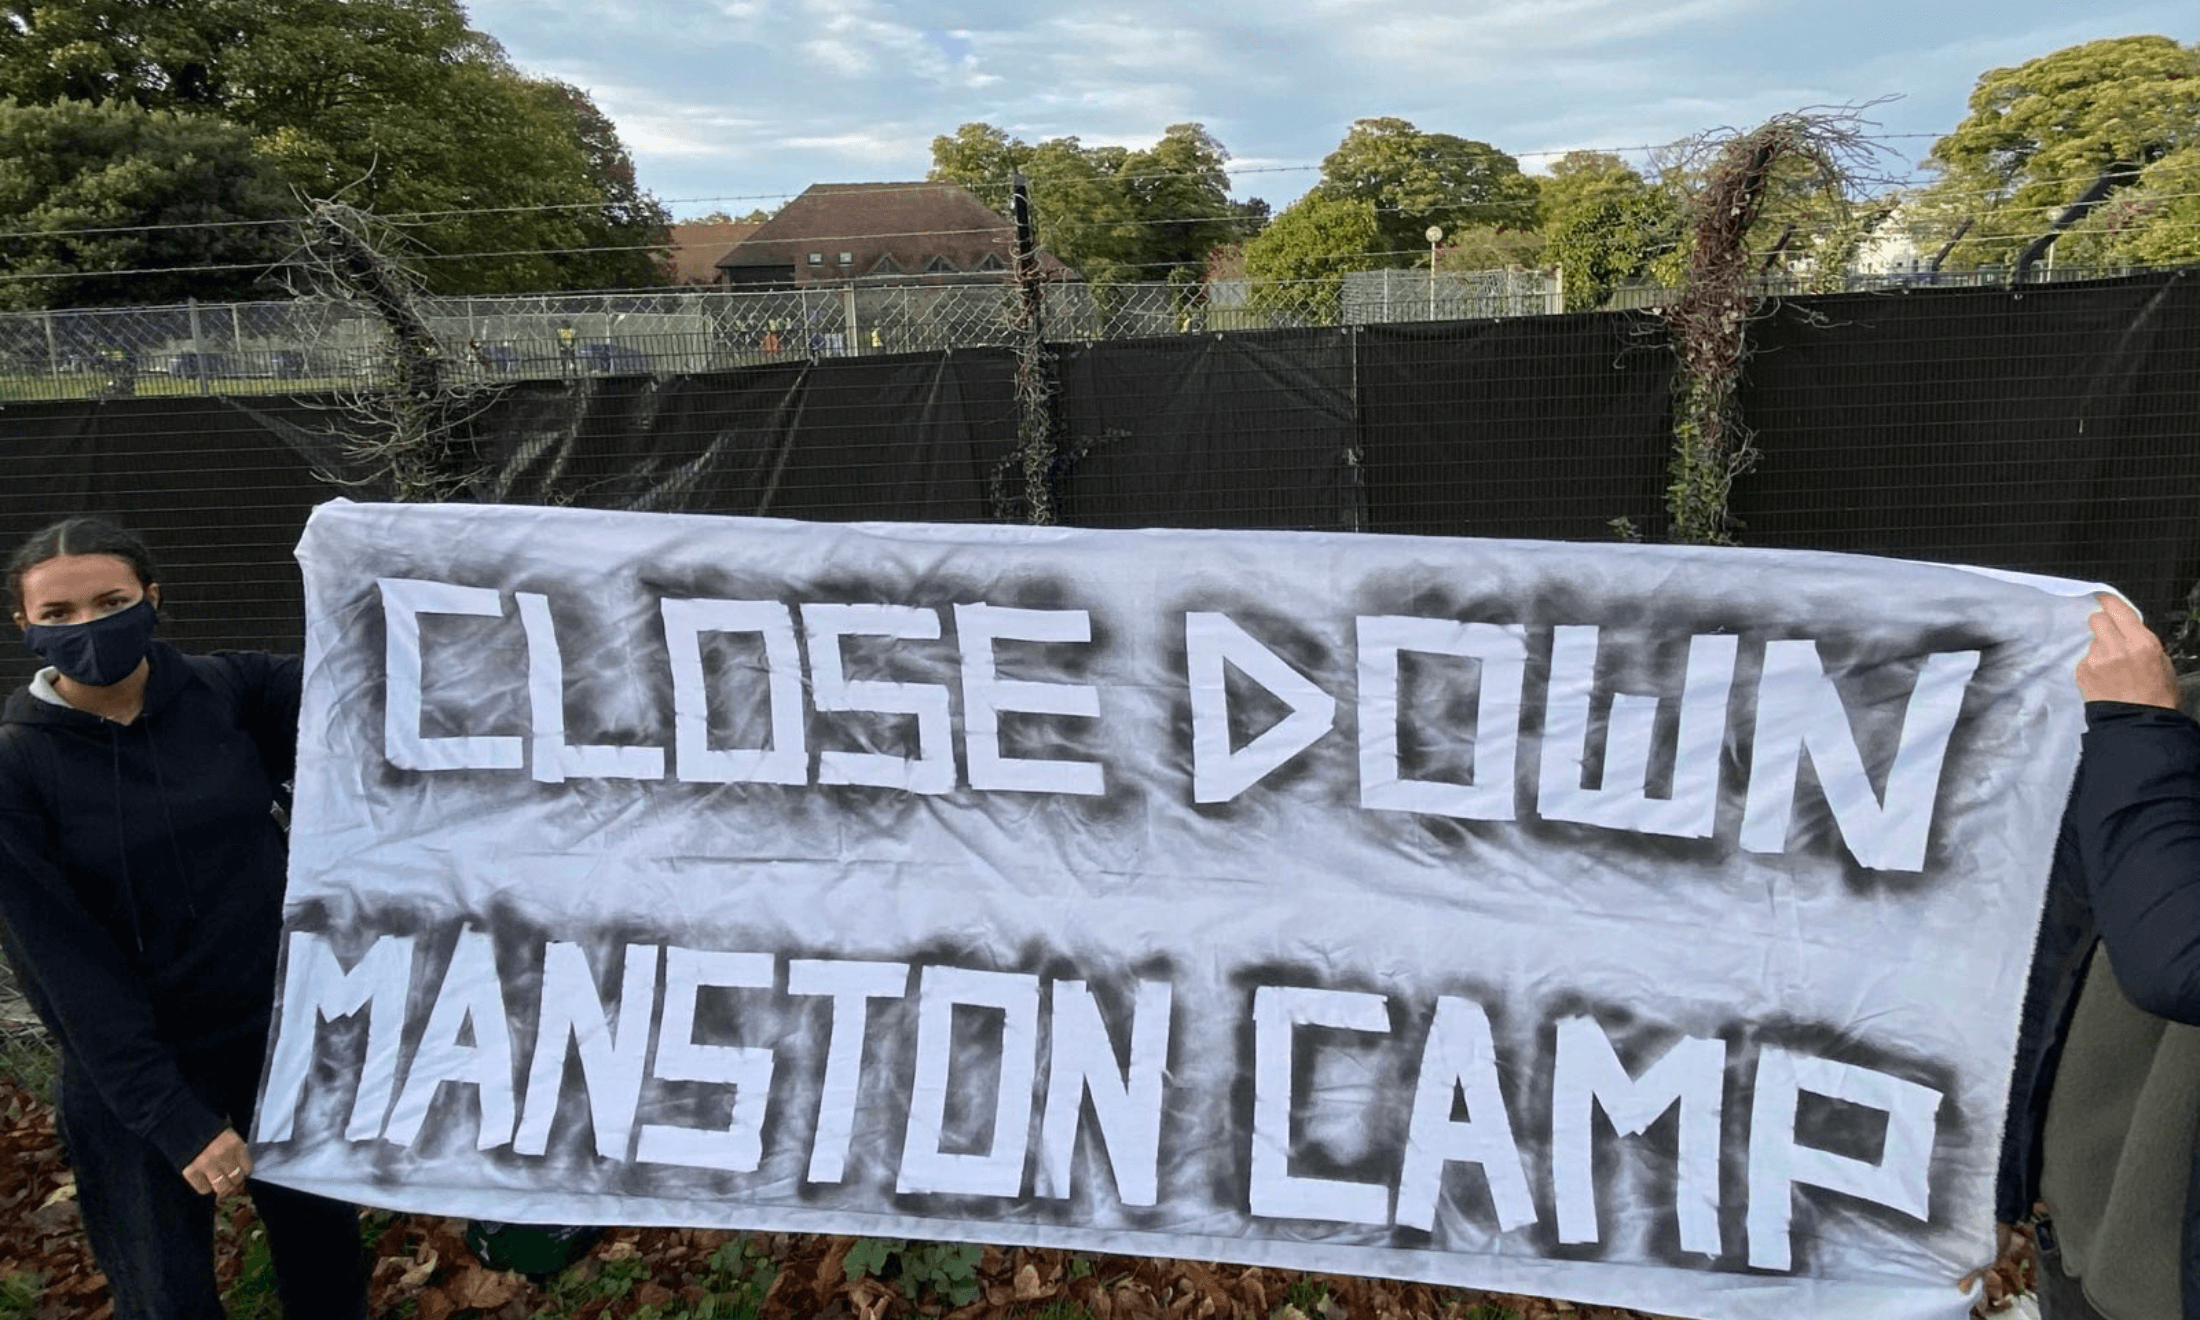 Shut down Manston camp, and take the rest of the UK’s violent immigration system with it